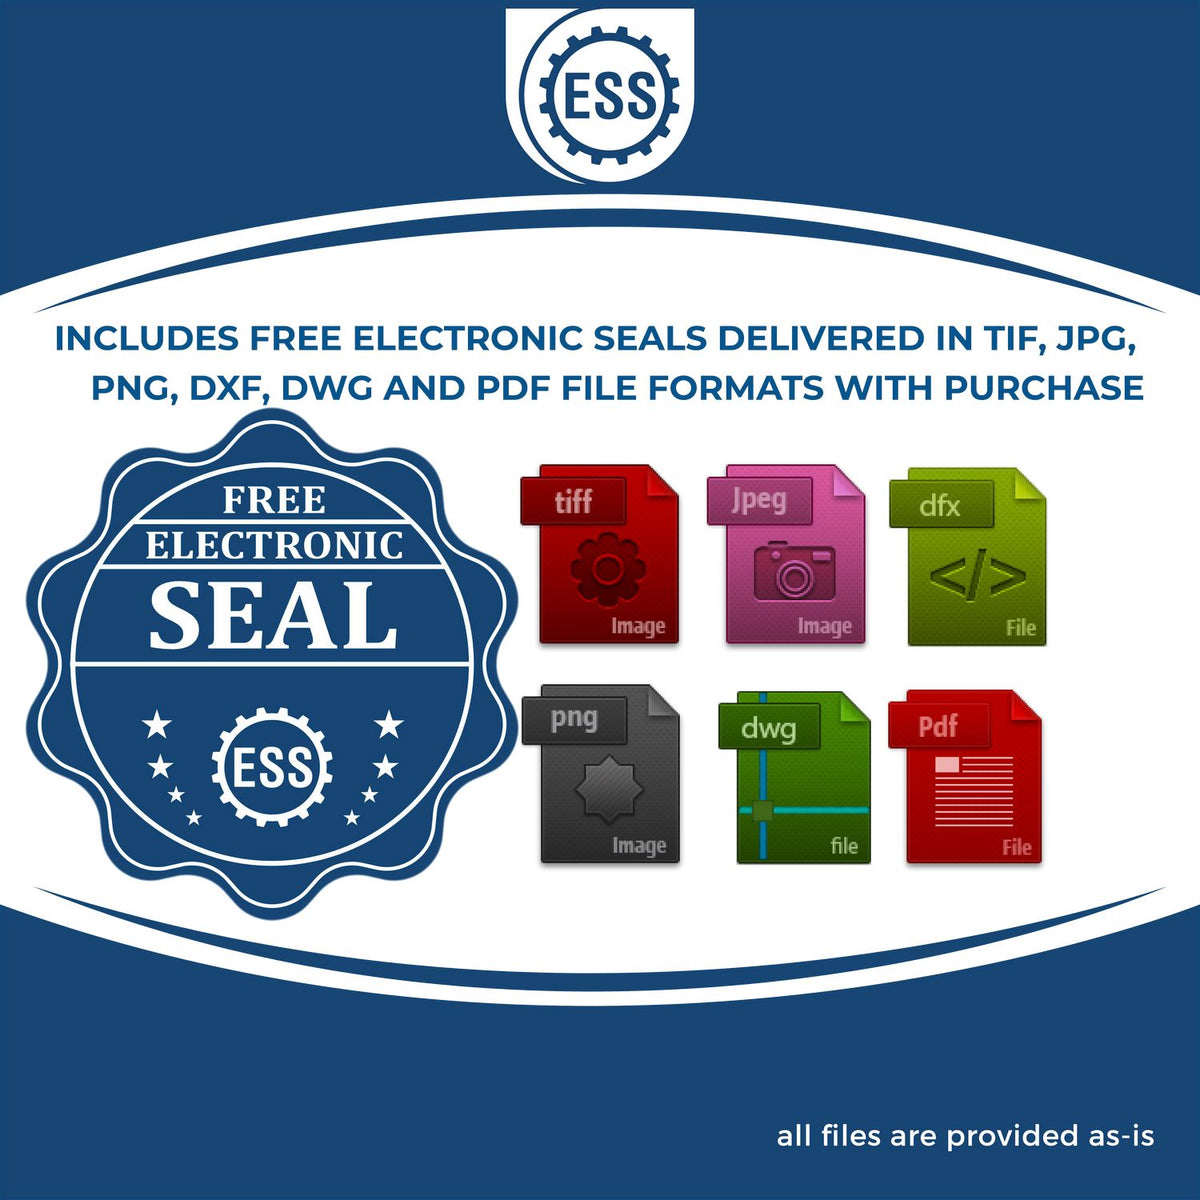 An infographic for the free electronic seal for the Gift Maine Land Surveyor Seal illustrating the different file type icons such as DXF, DWG, TIF, JPG and PNG.